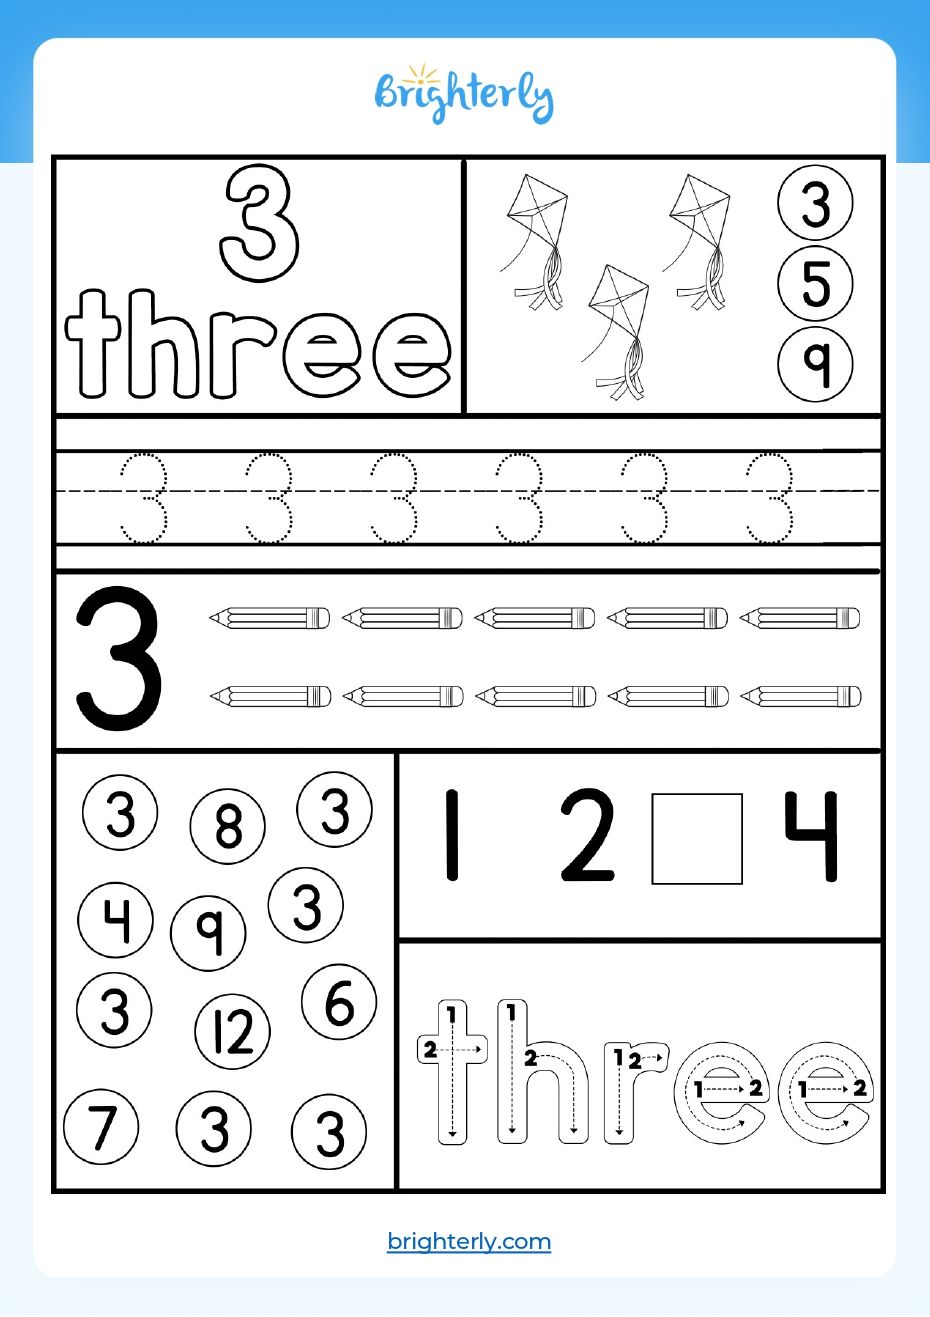 free-printable-number-3-three-worksheets-for-kids-pdfs-brighterly